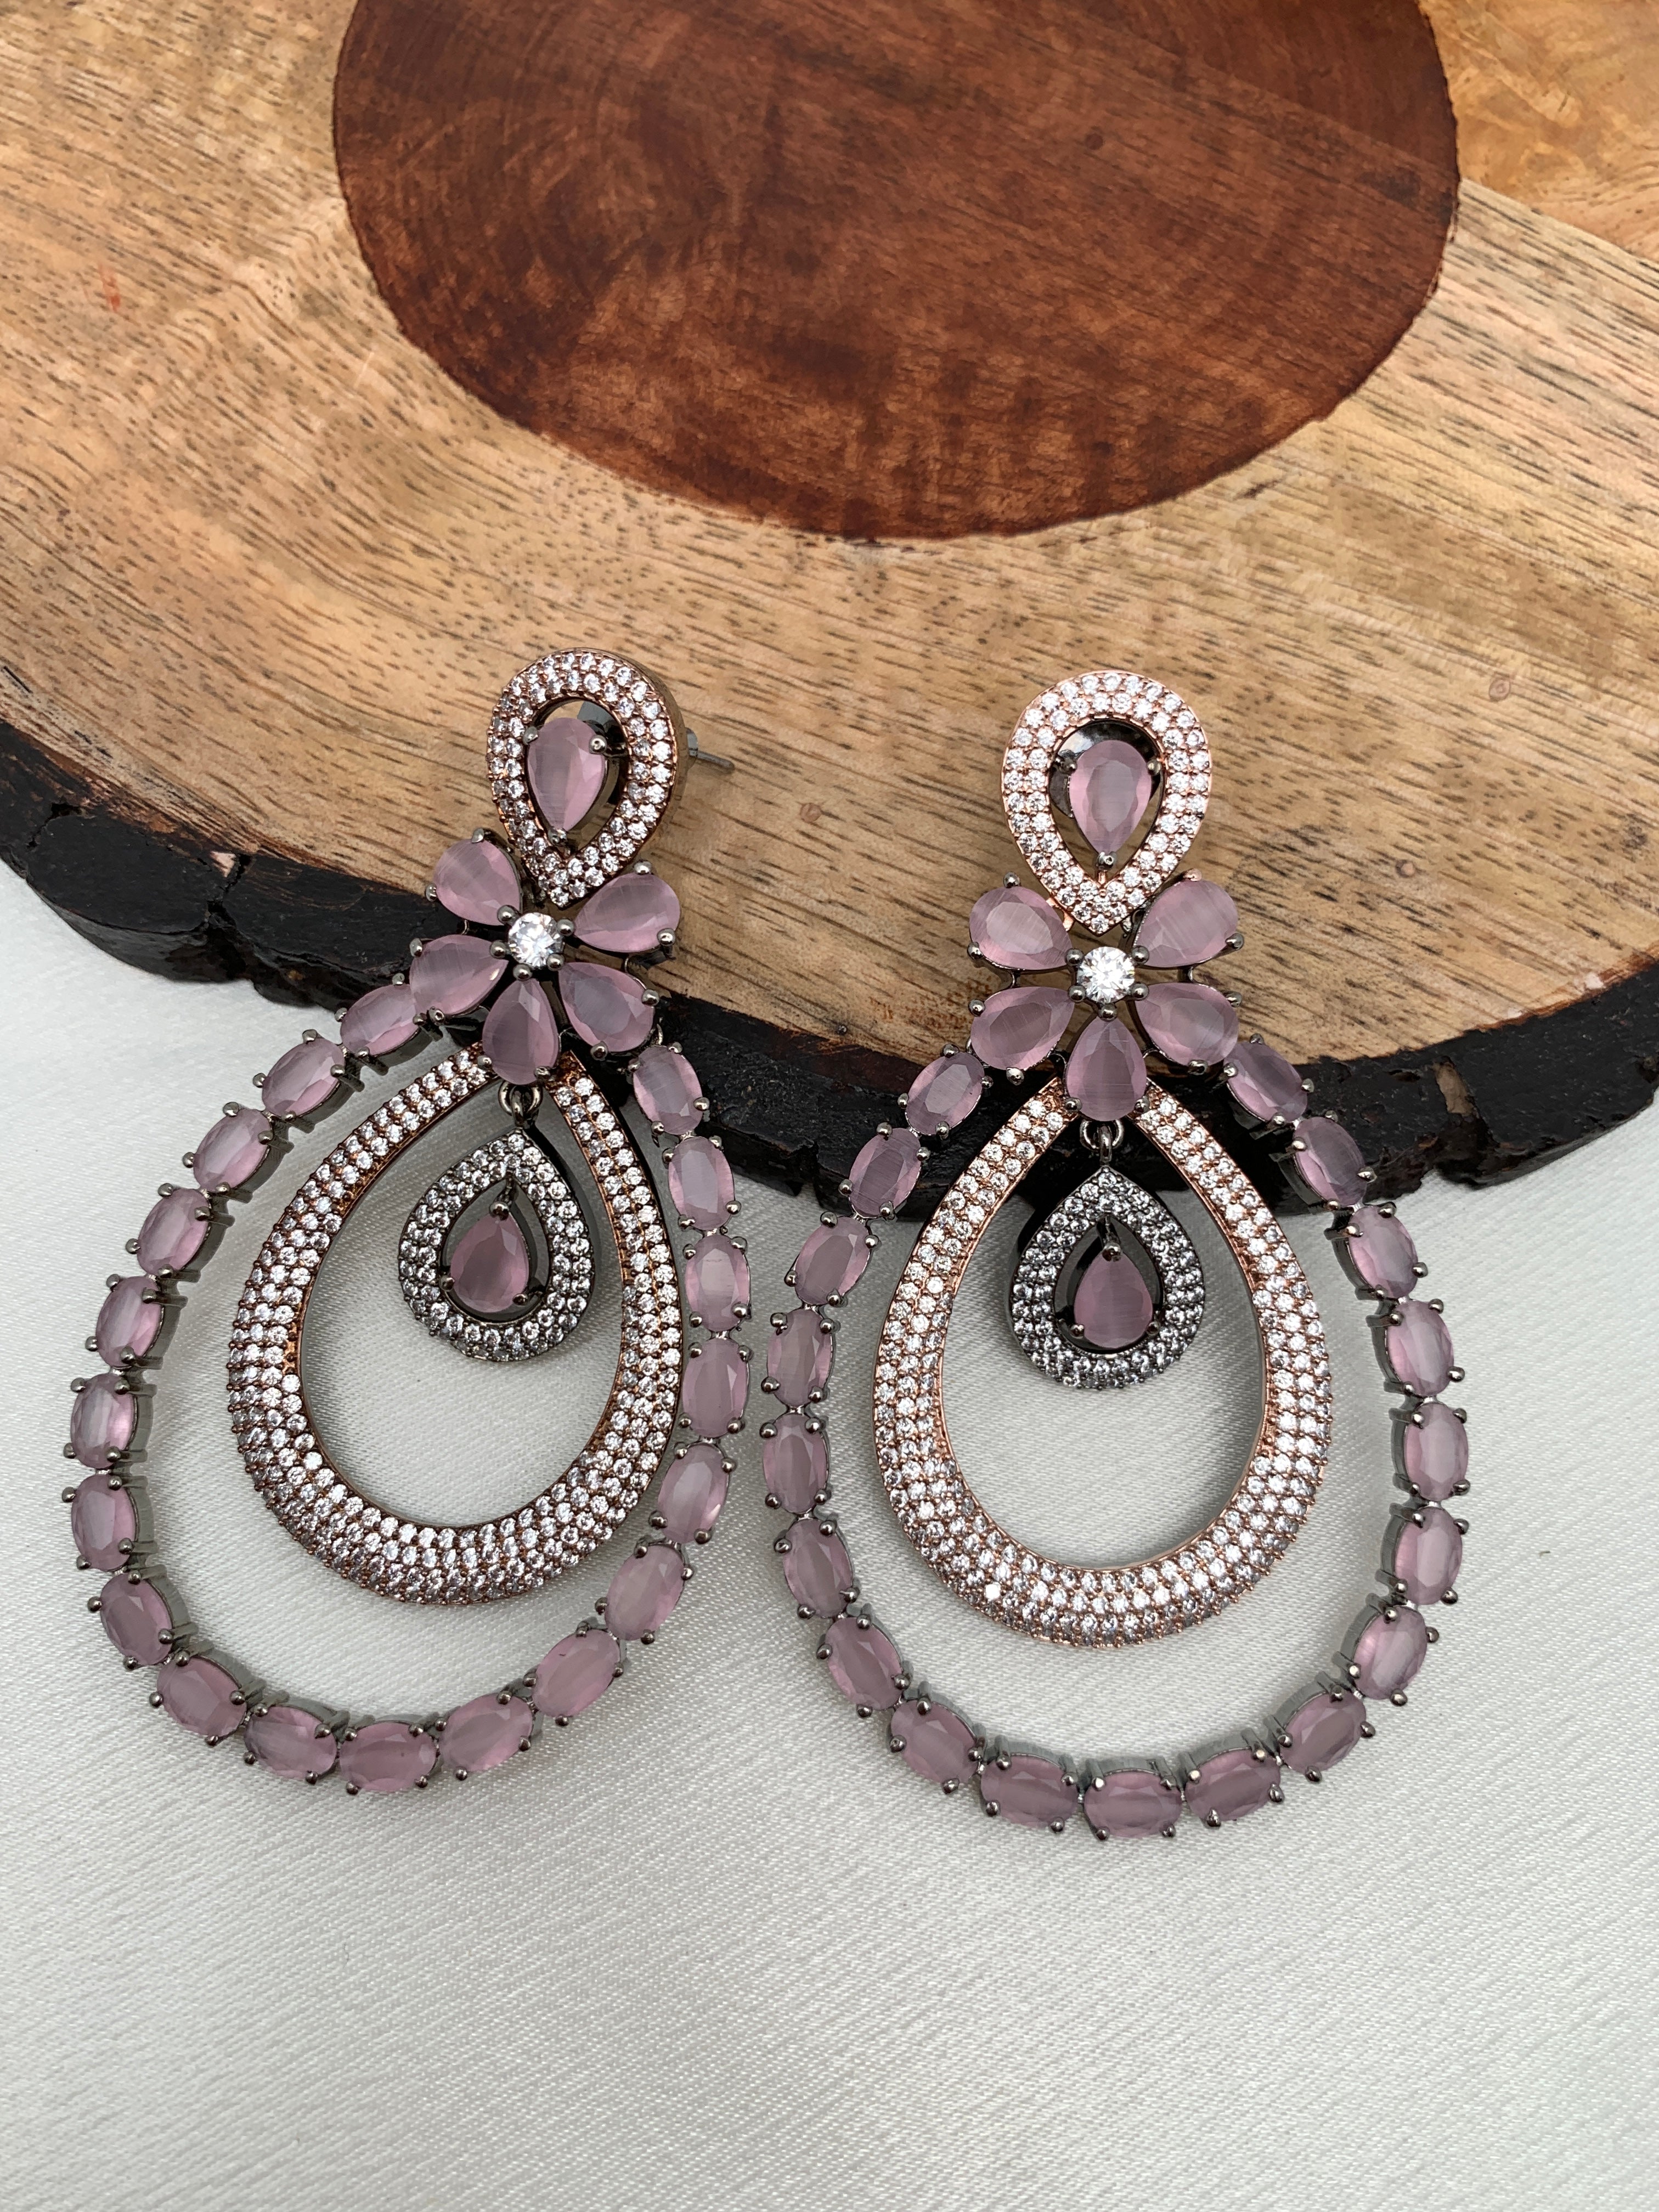 Share more than 67 american stone earrings latest